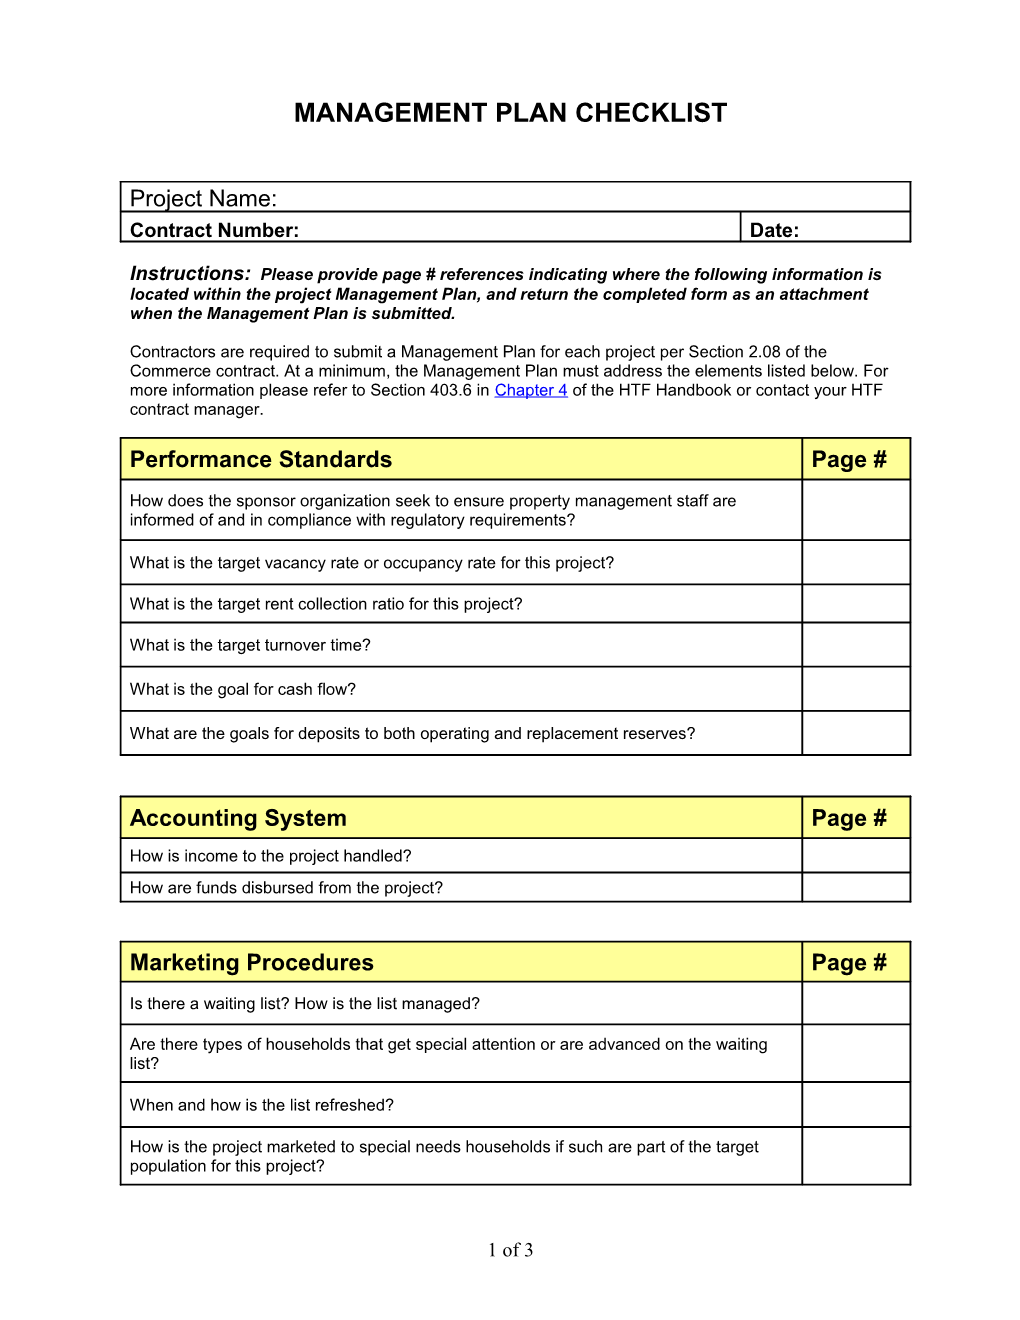 Management Plan Checklist - Revised May 2010